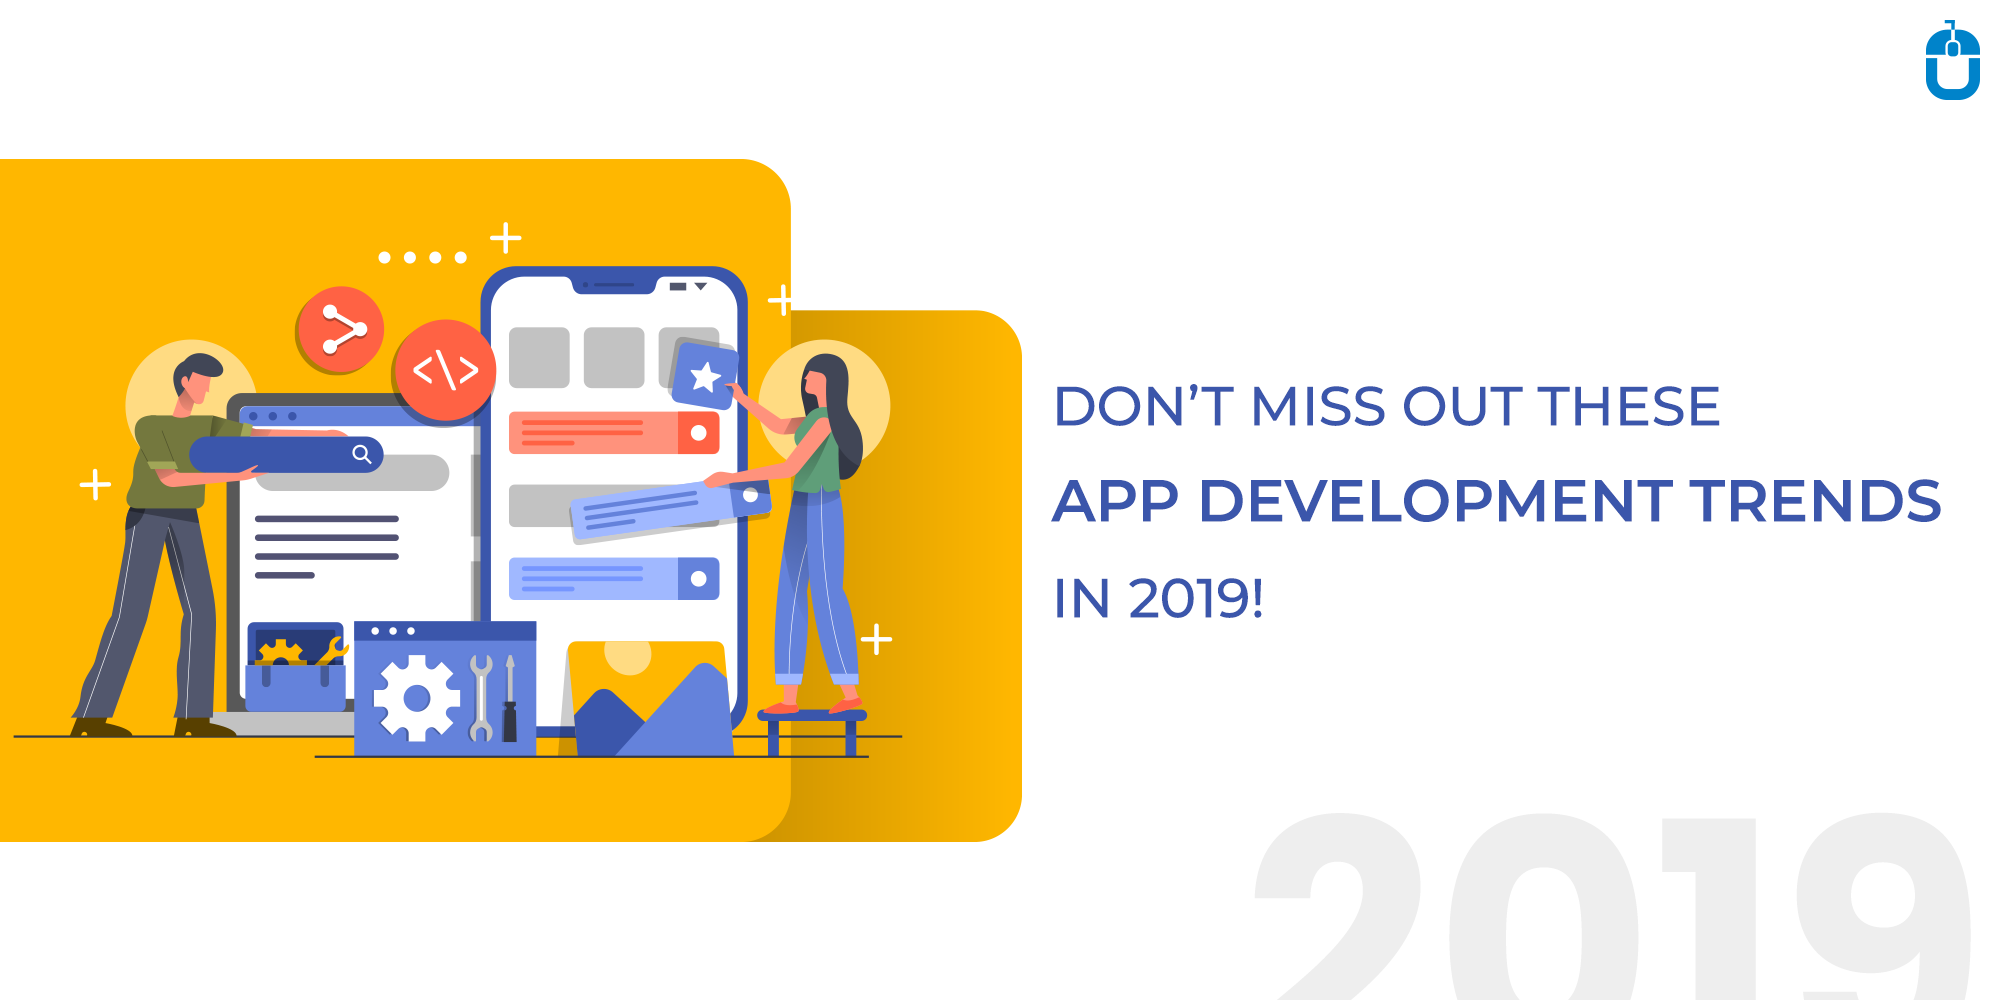 Don’t Miss Out These App Development Trends In 2019!